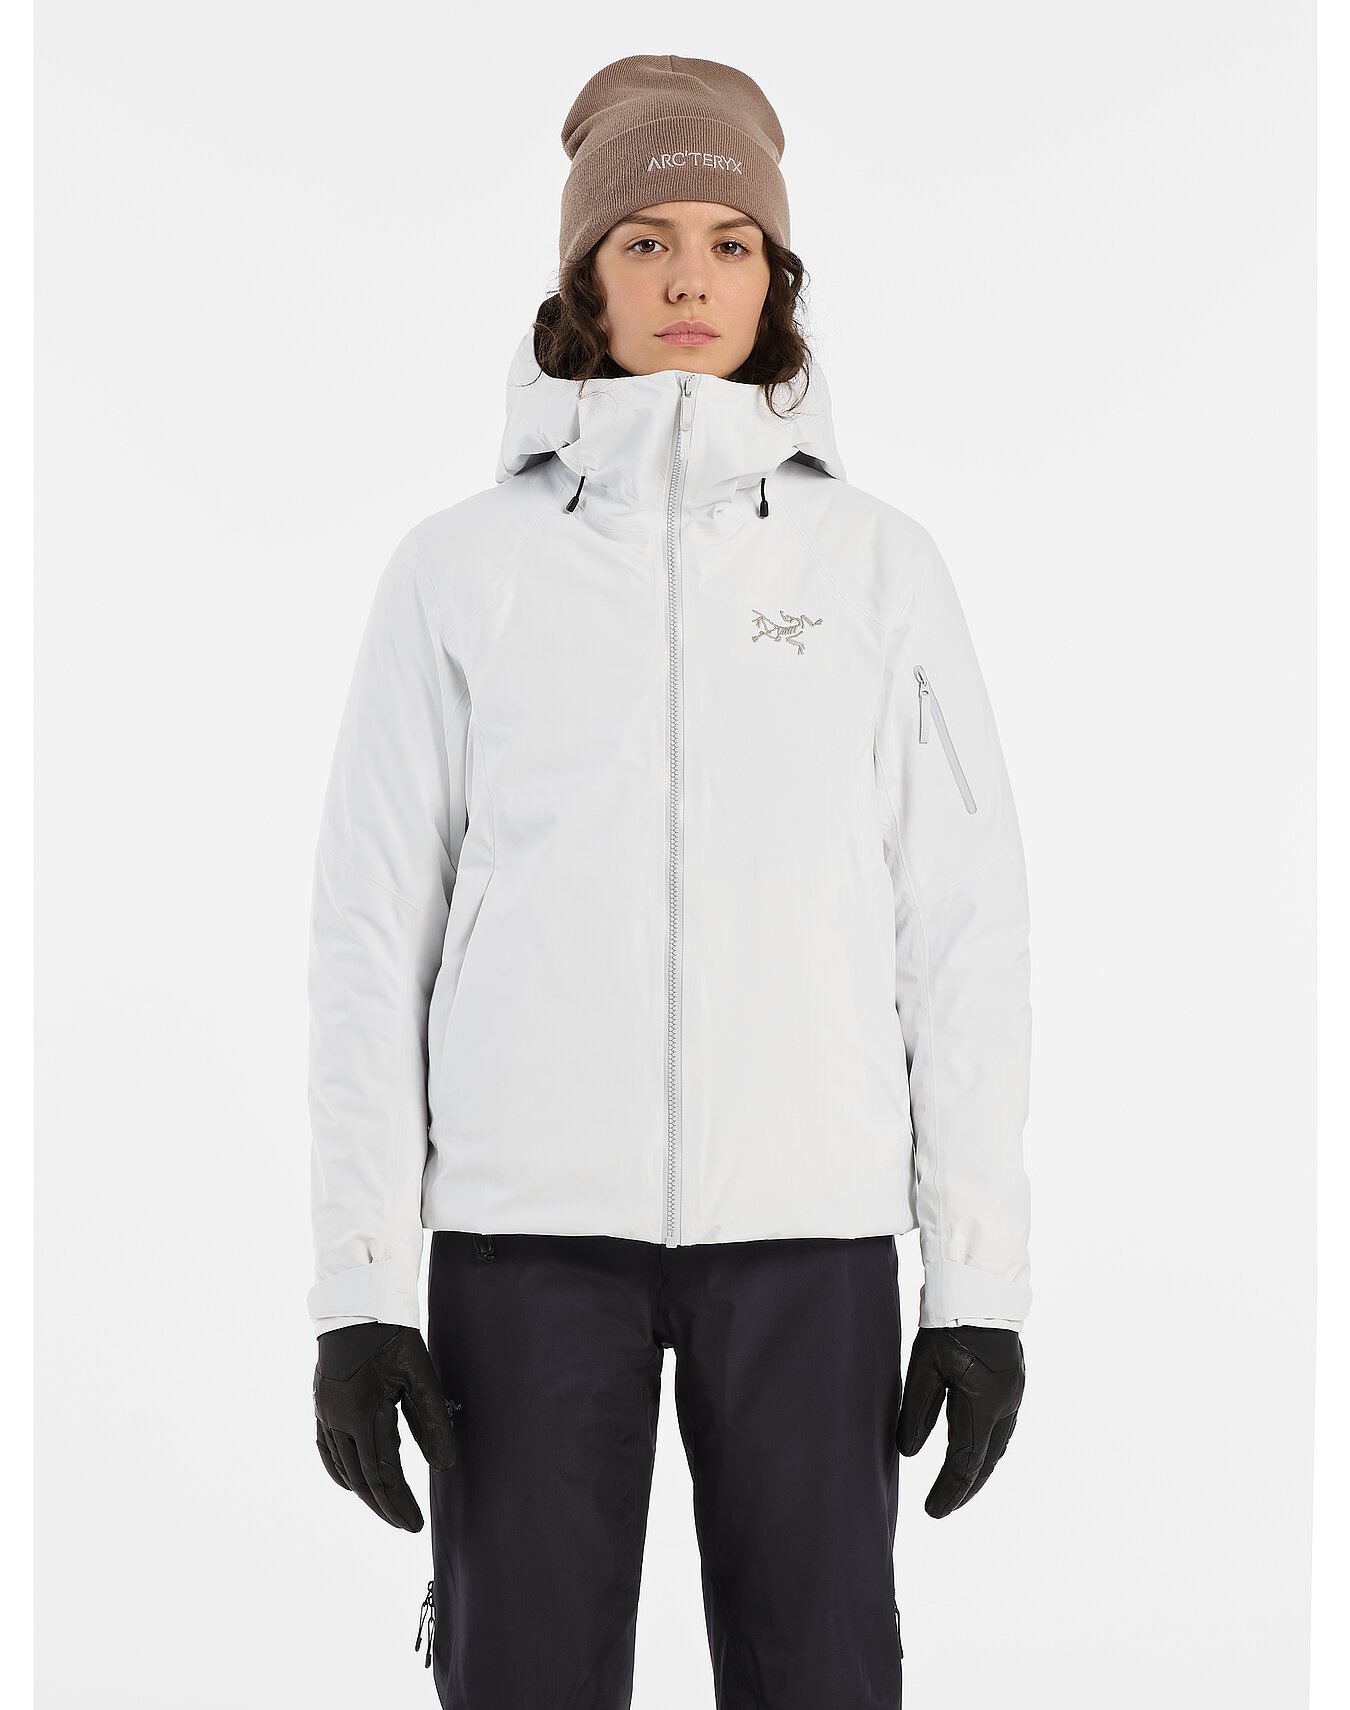 Arc'teryx Used Women's Insulated Jackets | Used Gear